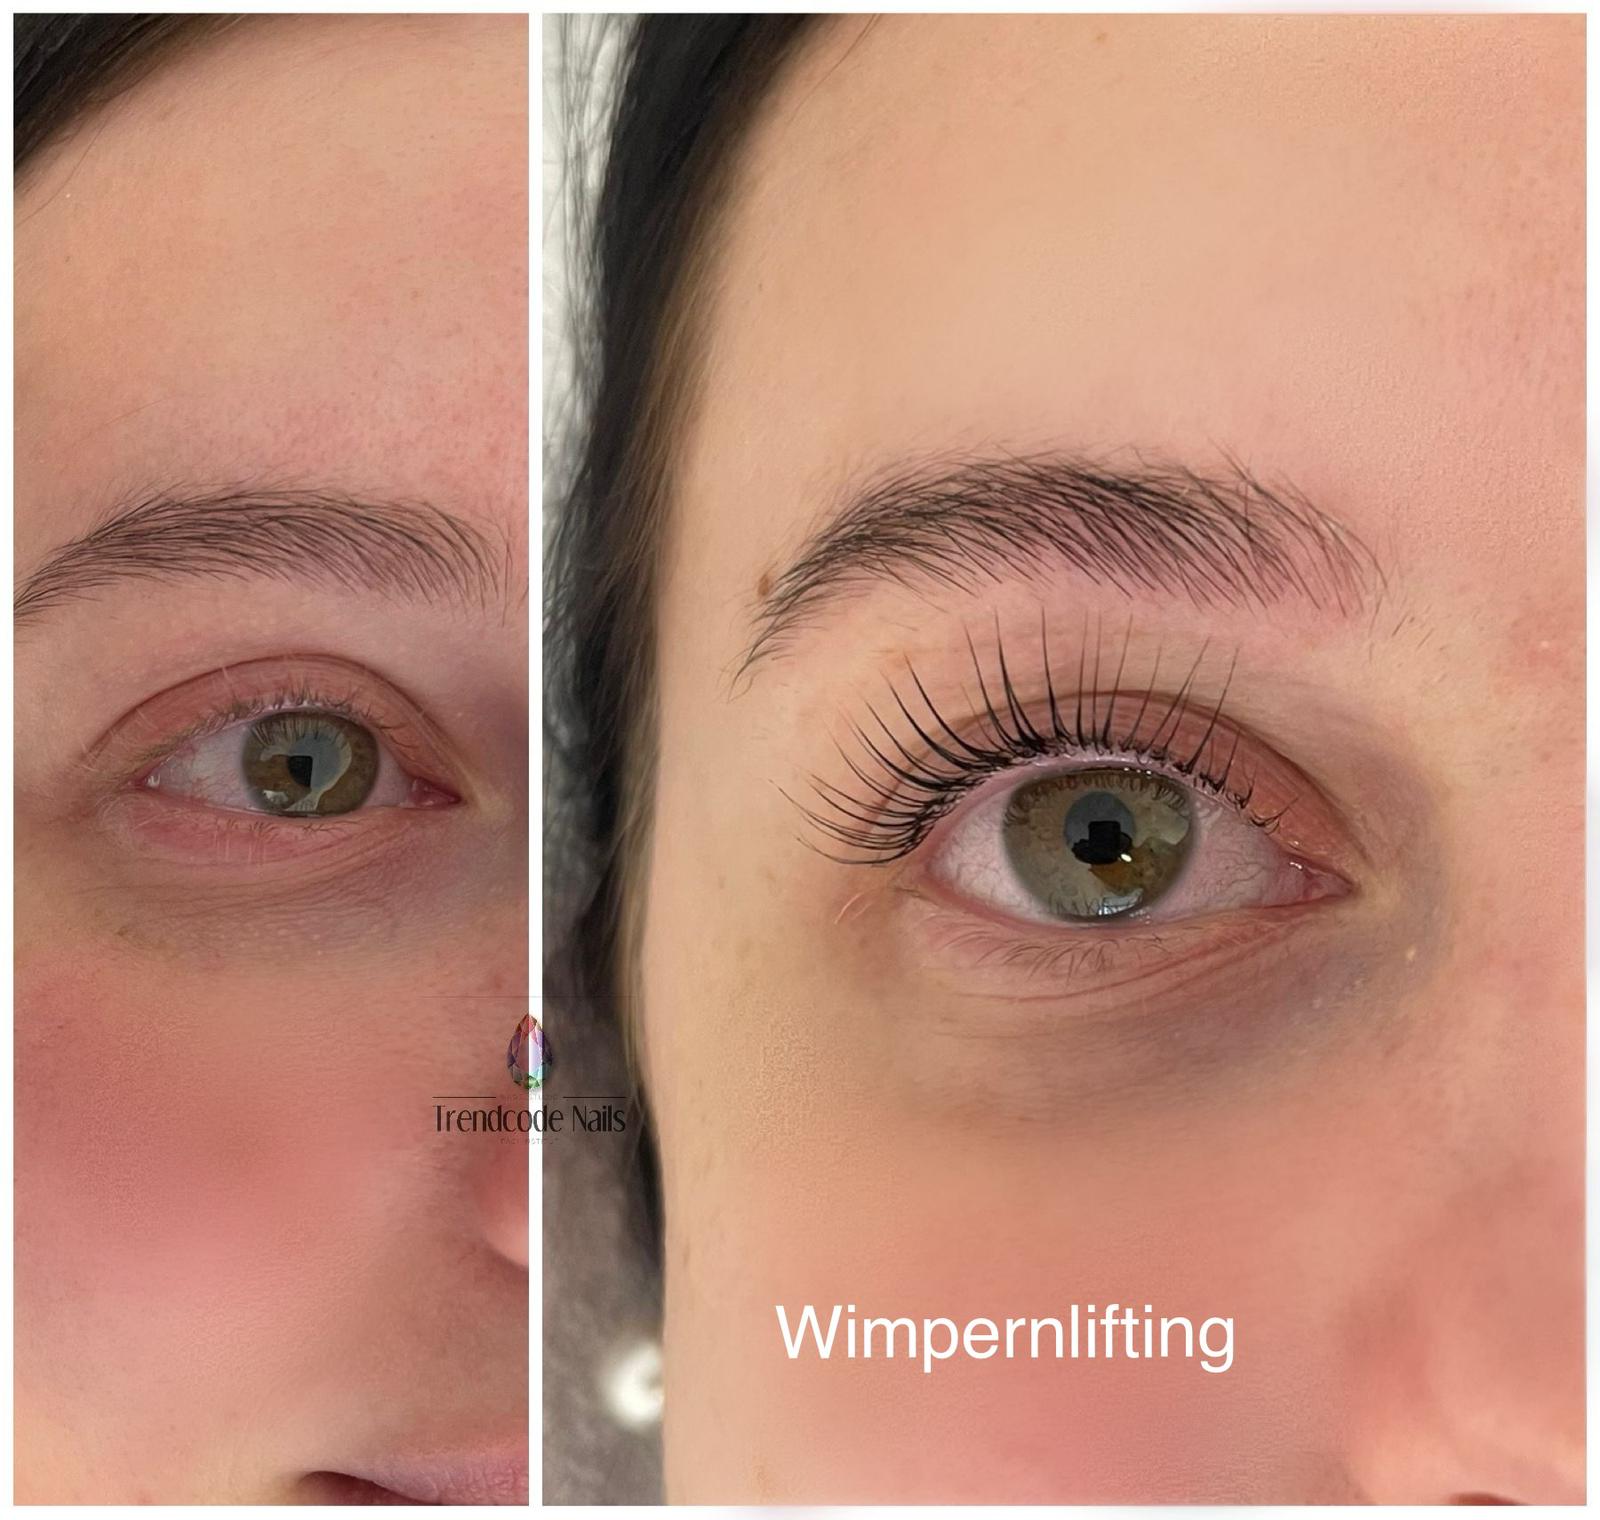 Wimpernlifting